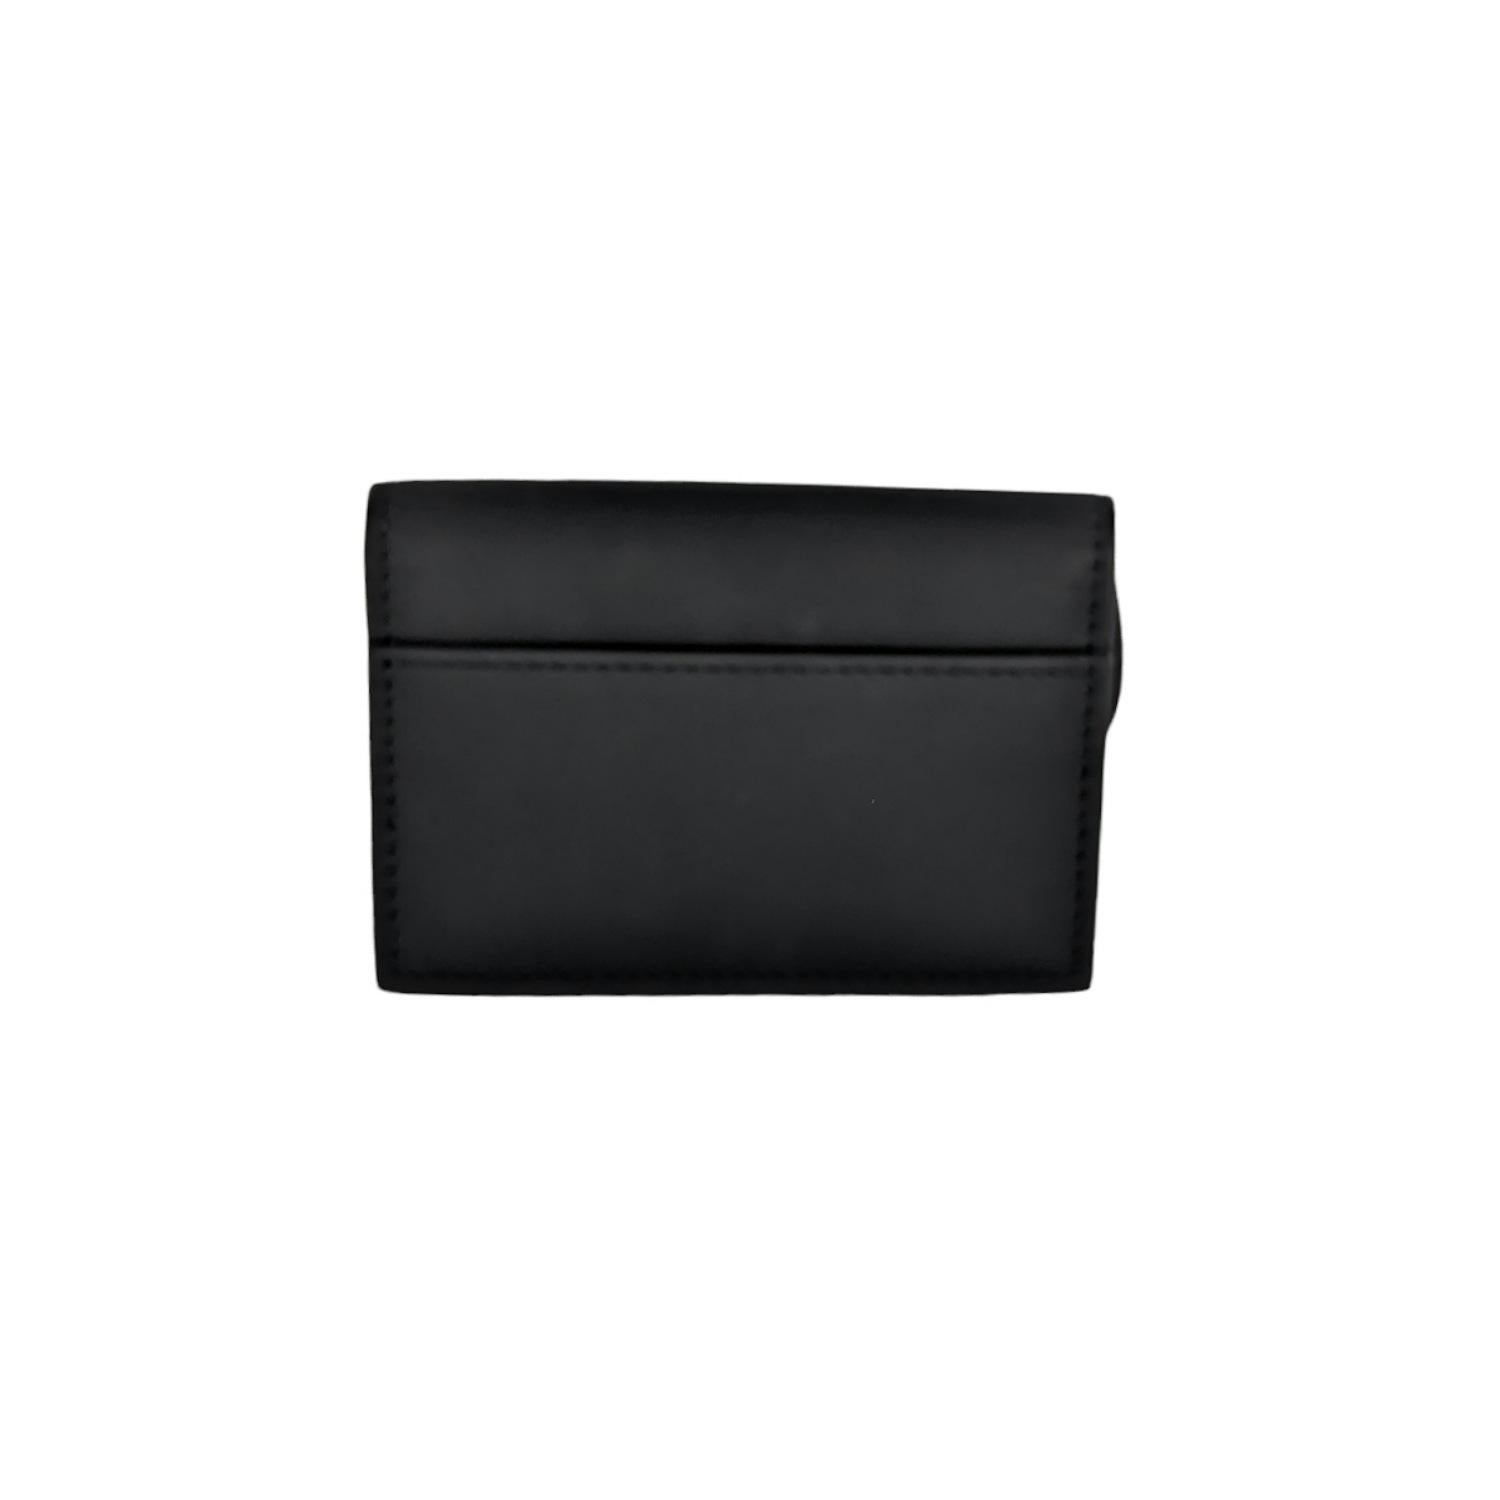 The Saddle flap card holder is a compact and practical alternative to the traditional wallet. Crafted in black ultra matte calfskin, the artisanal design is durable and can hold the daily essentials. The small and easy-to-use companion may be paired